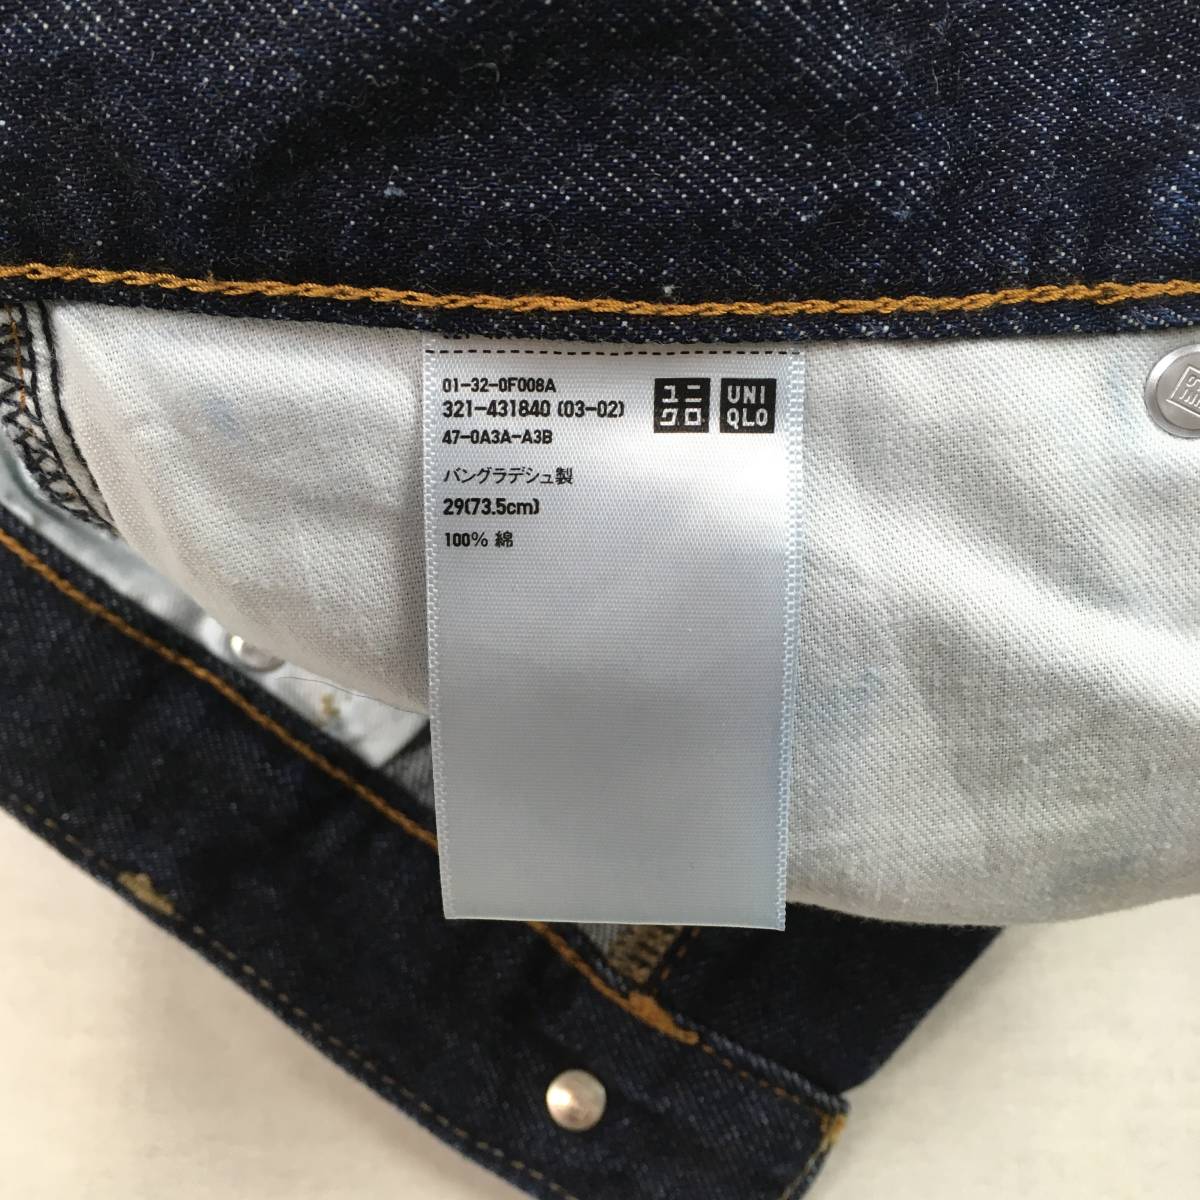 UNIQLO ユニクロ セルビッチ レギュラーフィット ストレート デニム ジーンズ 綿100% W29 ジップフライ セルビッチ 赤耳  product details | Proxy bidding and ordering service for auctions and  shopping within Japan and the United States - Get